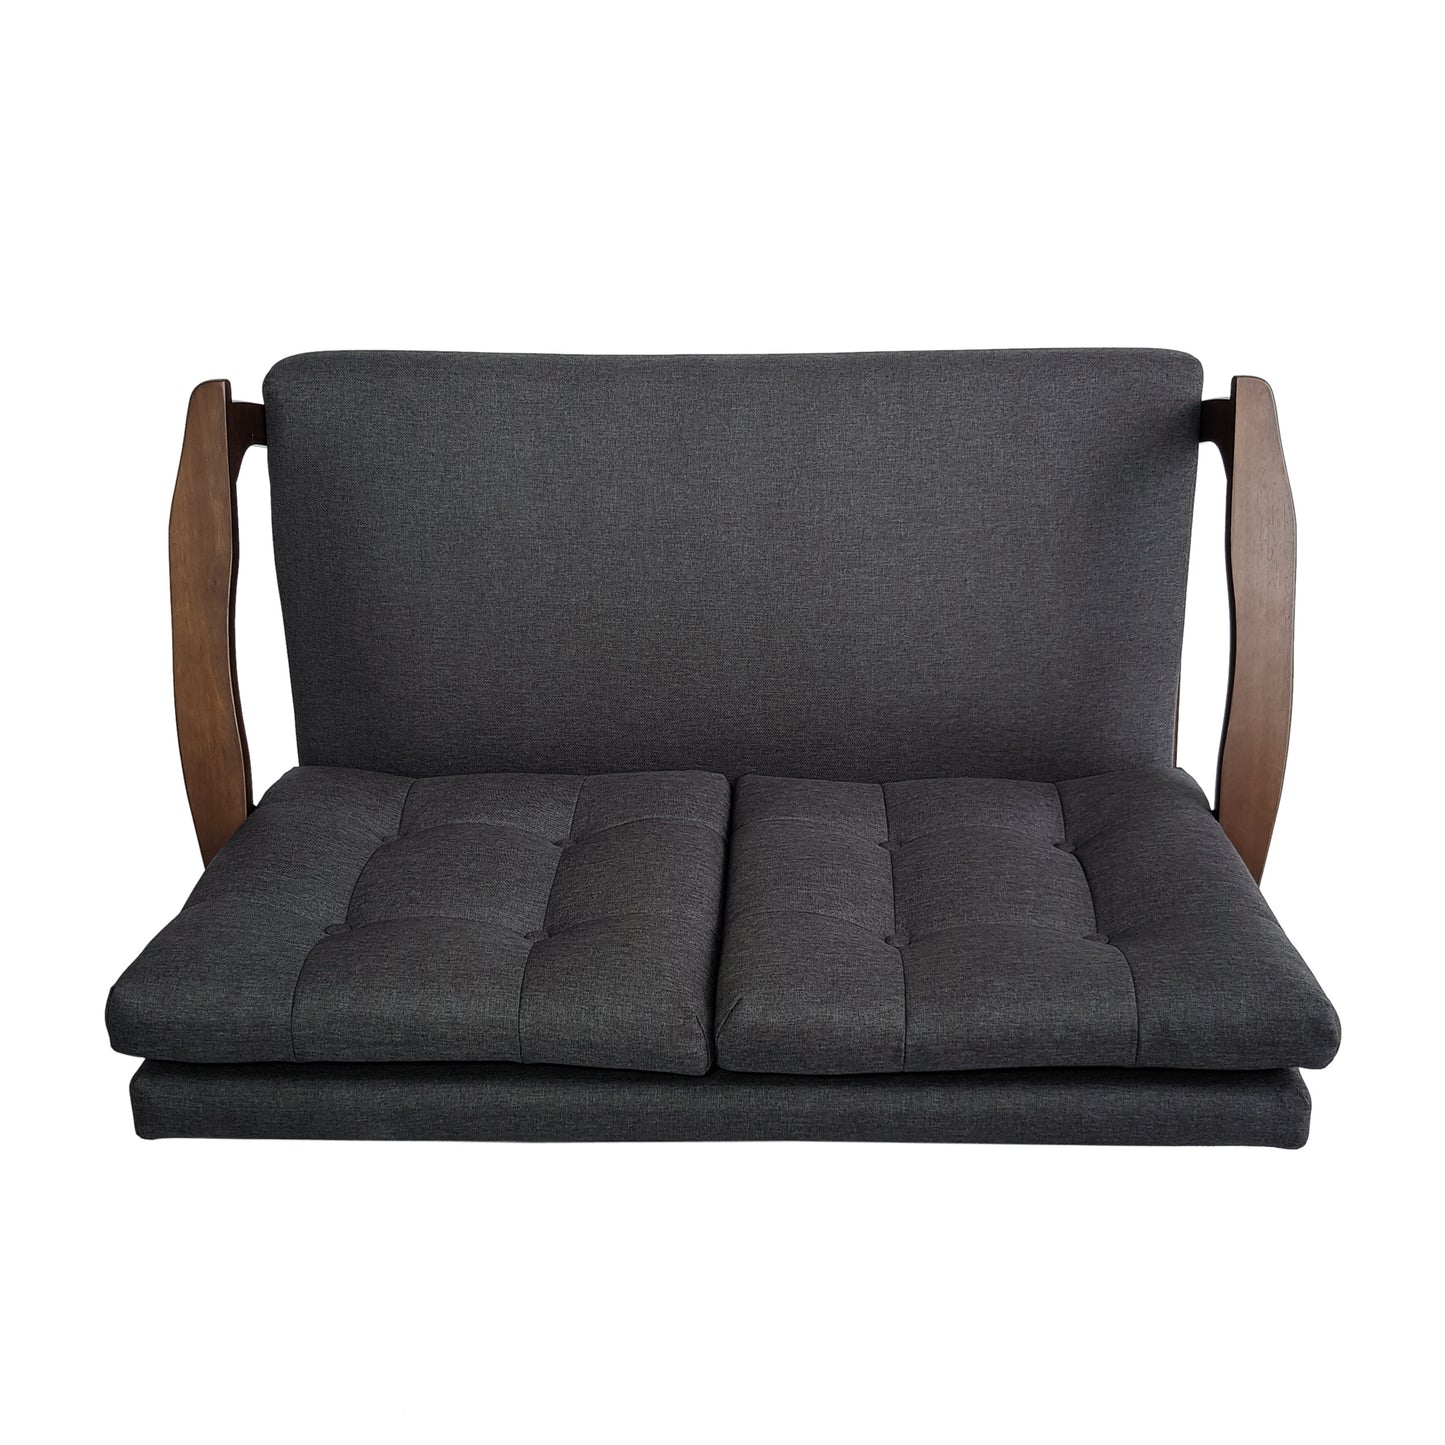 Samulle Mid Century Waffle Stitch Tufted Accent Loveseat with Rubberwood Legs - Black and Walnut Finish